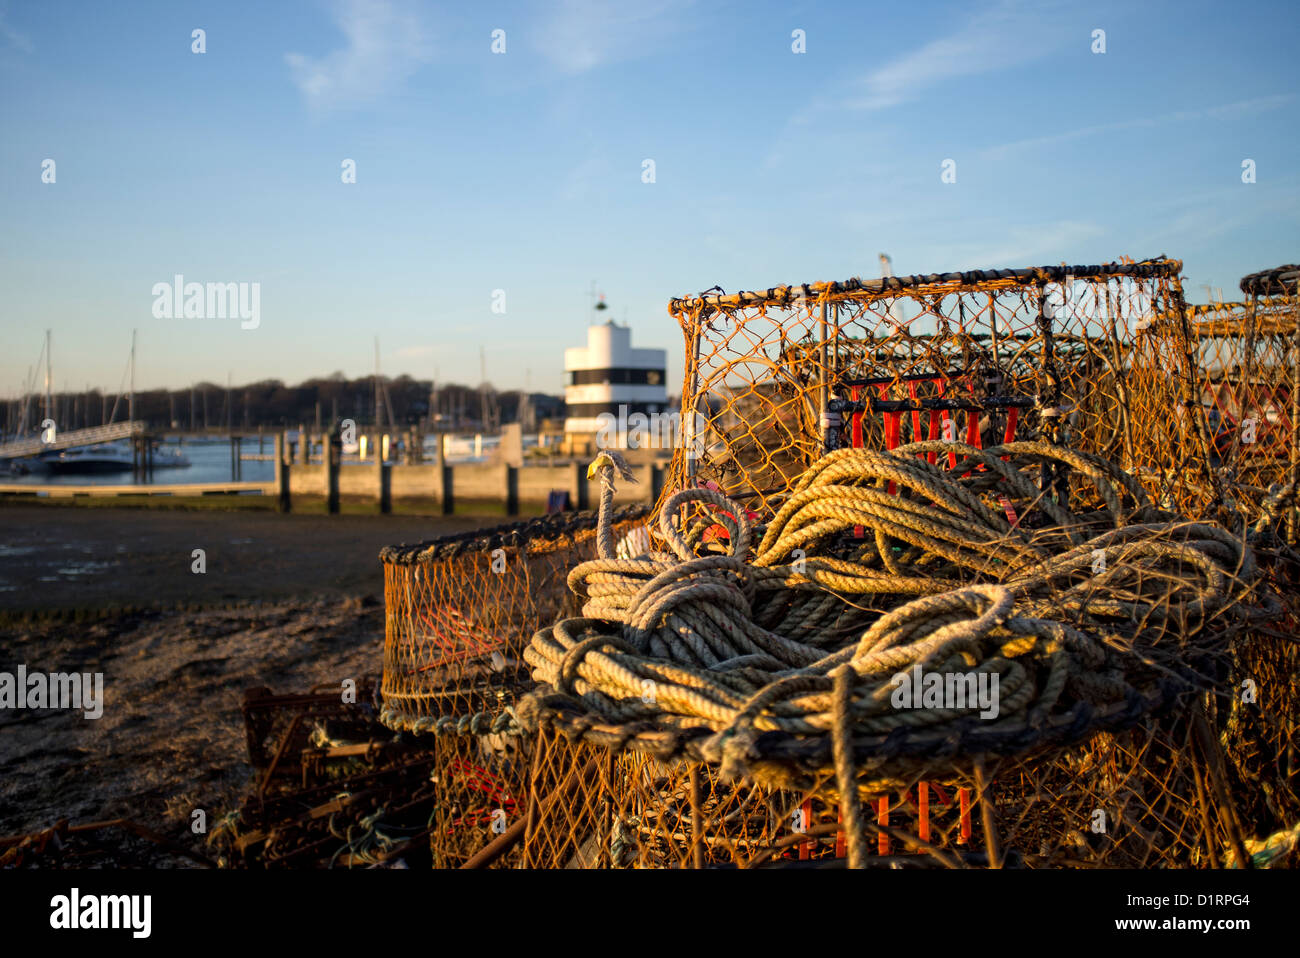 Lobster pots on the quay at warsash on the River Hamble UK Stock Photo